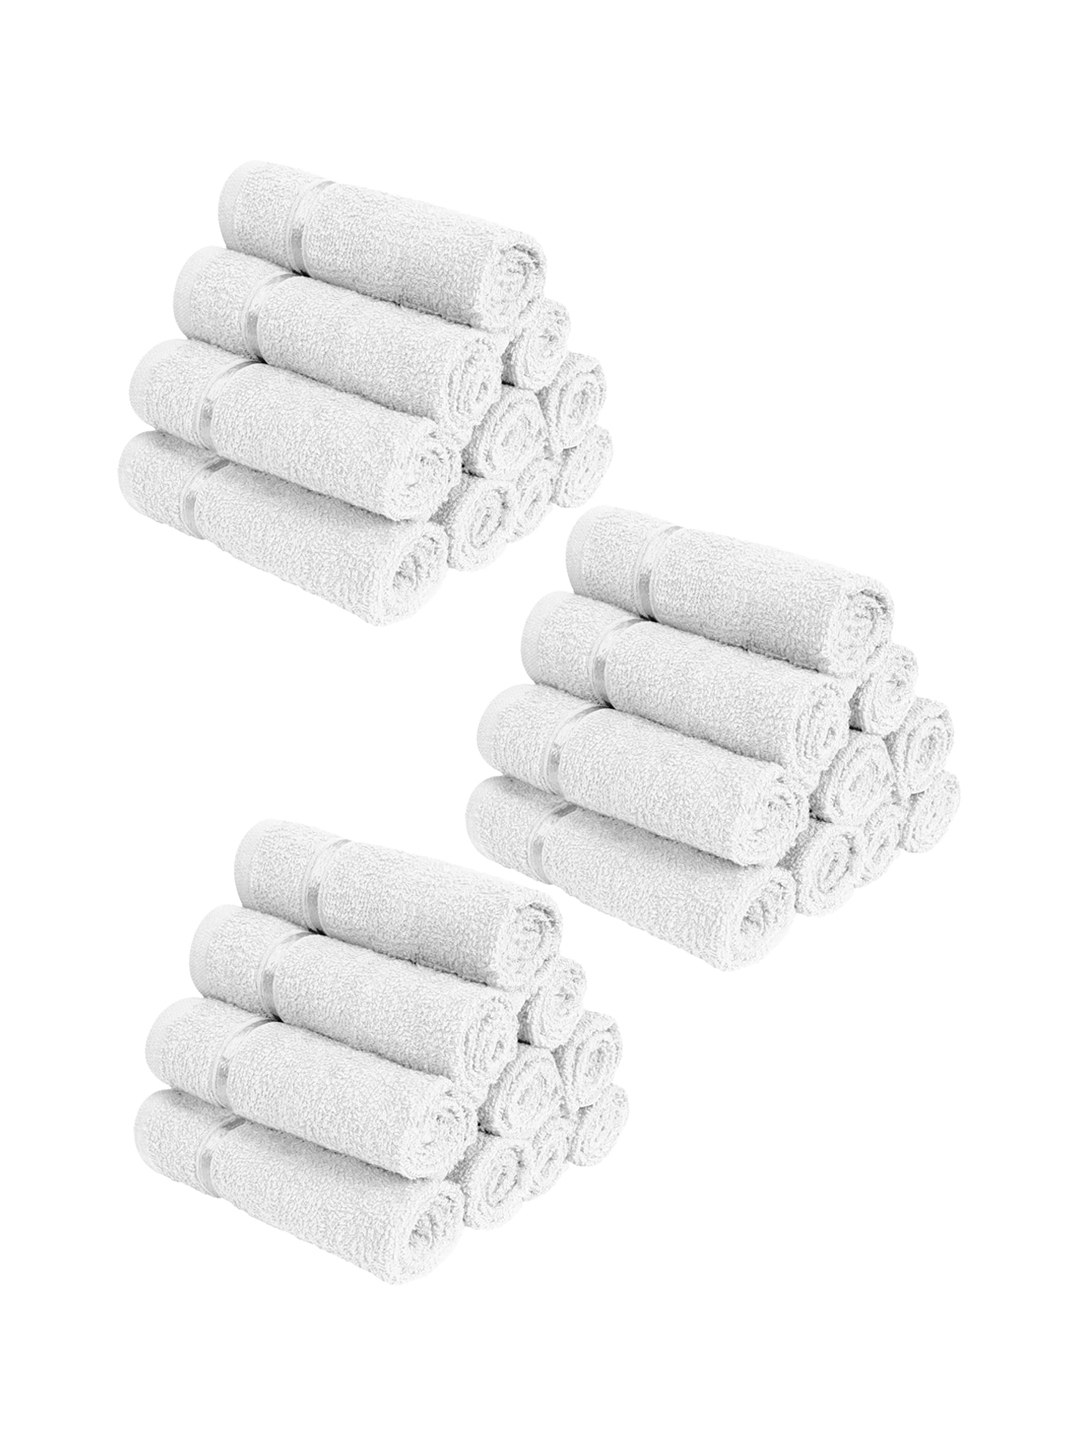 Story@home Set Of 30 White Solid 450 GSM Pure Cotton Face Towels